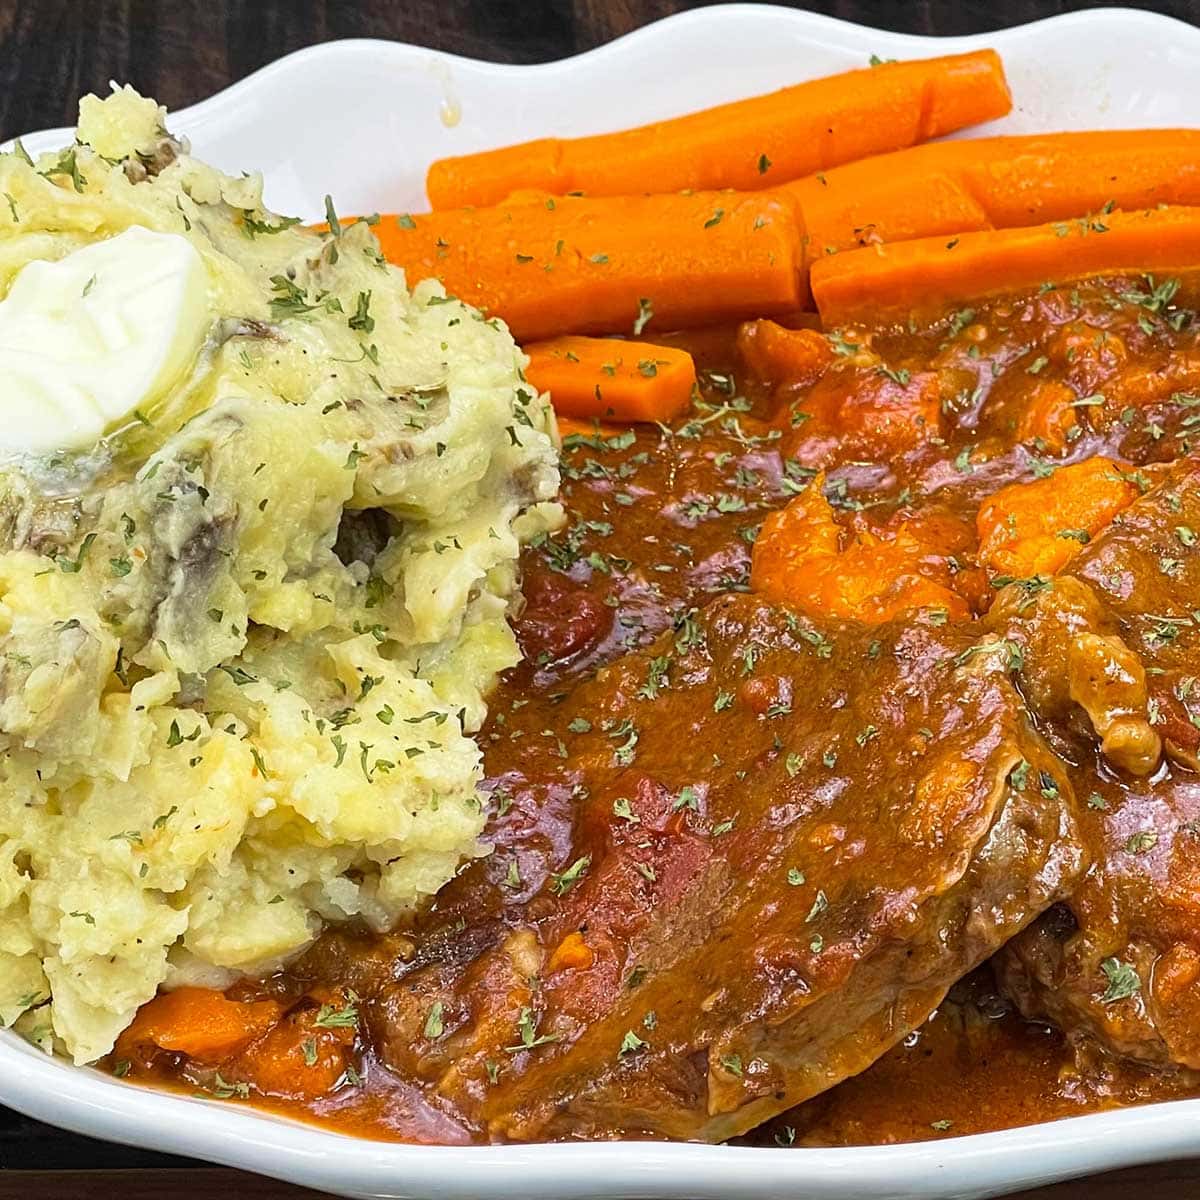 swiss steak on a platter with mashed potatoes and carrots